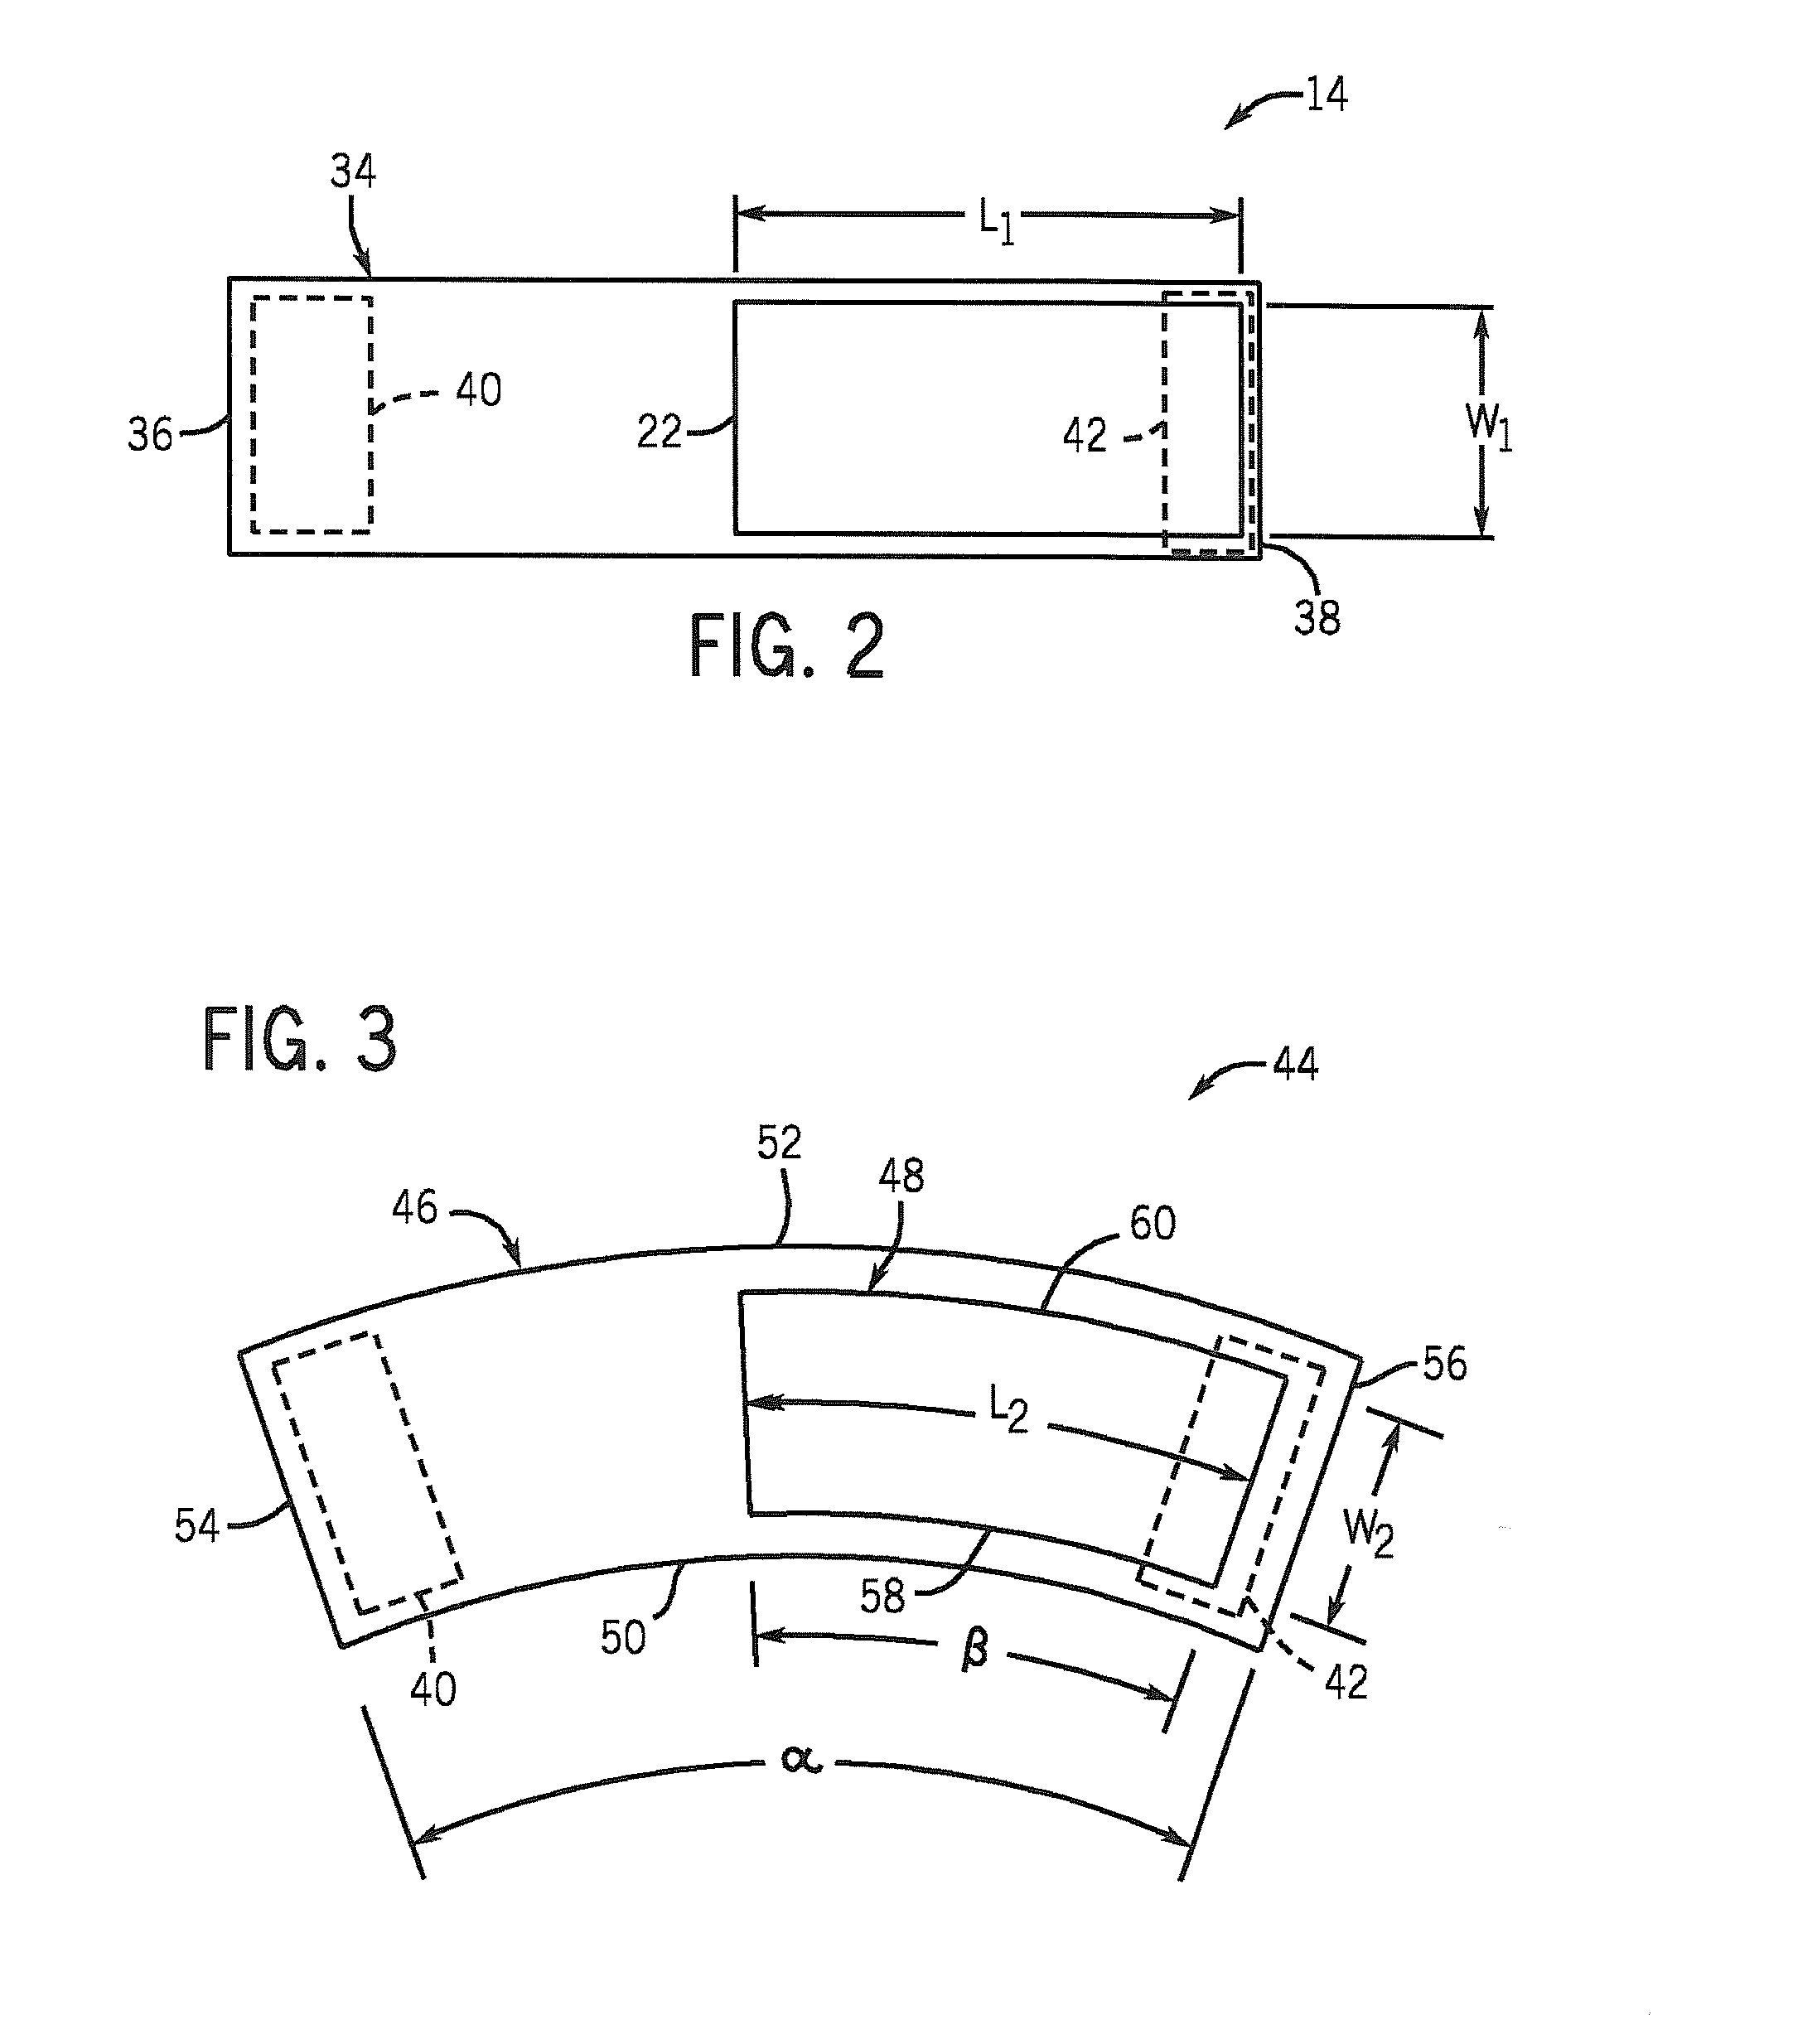 Blood pressure cuff apparatus and system